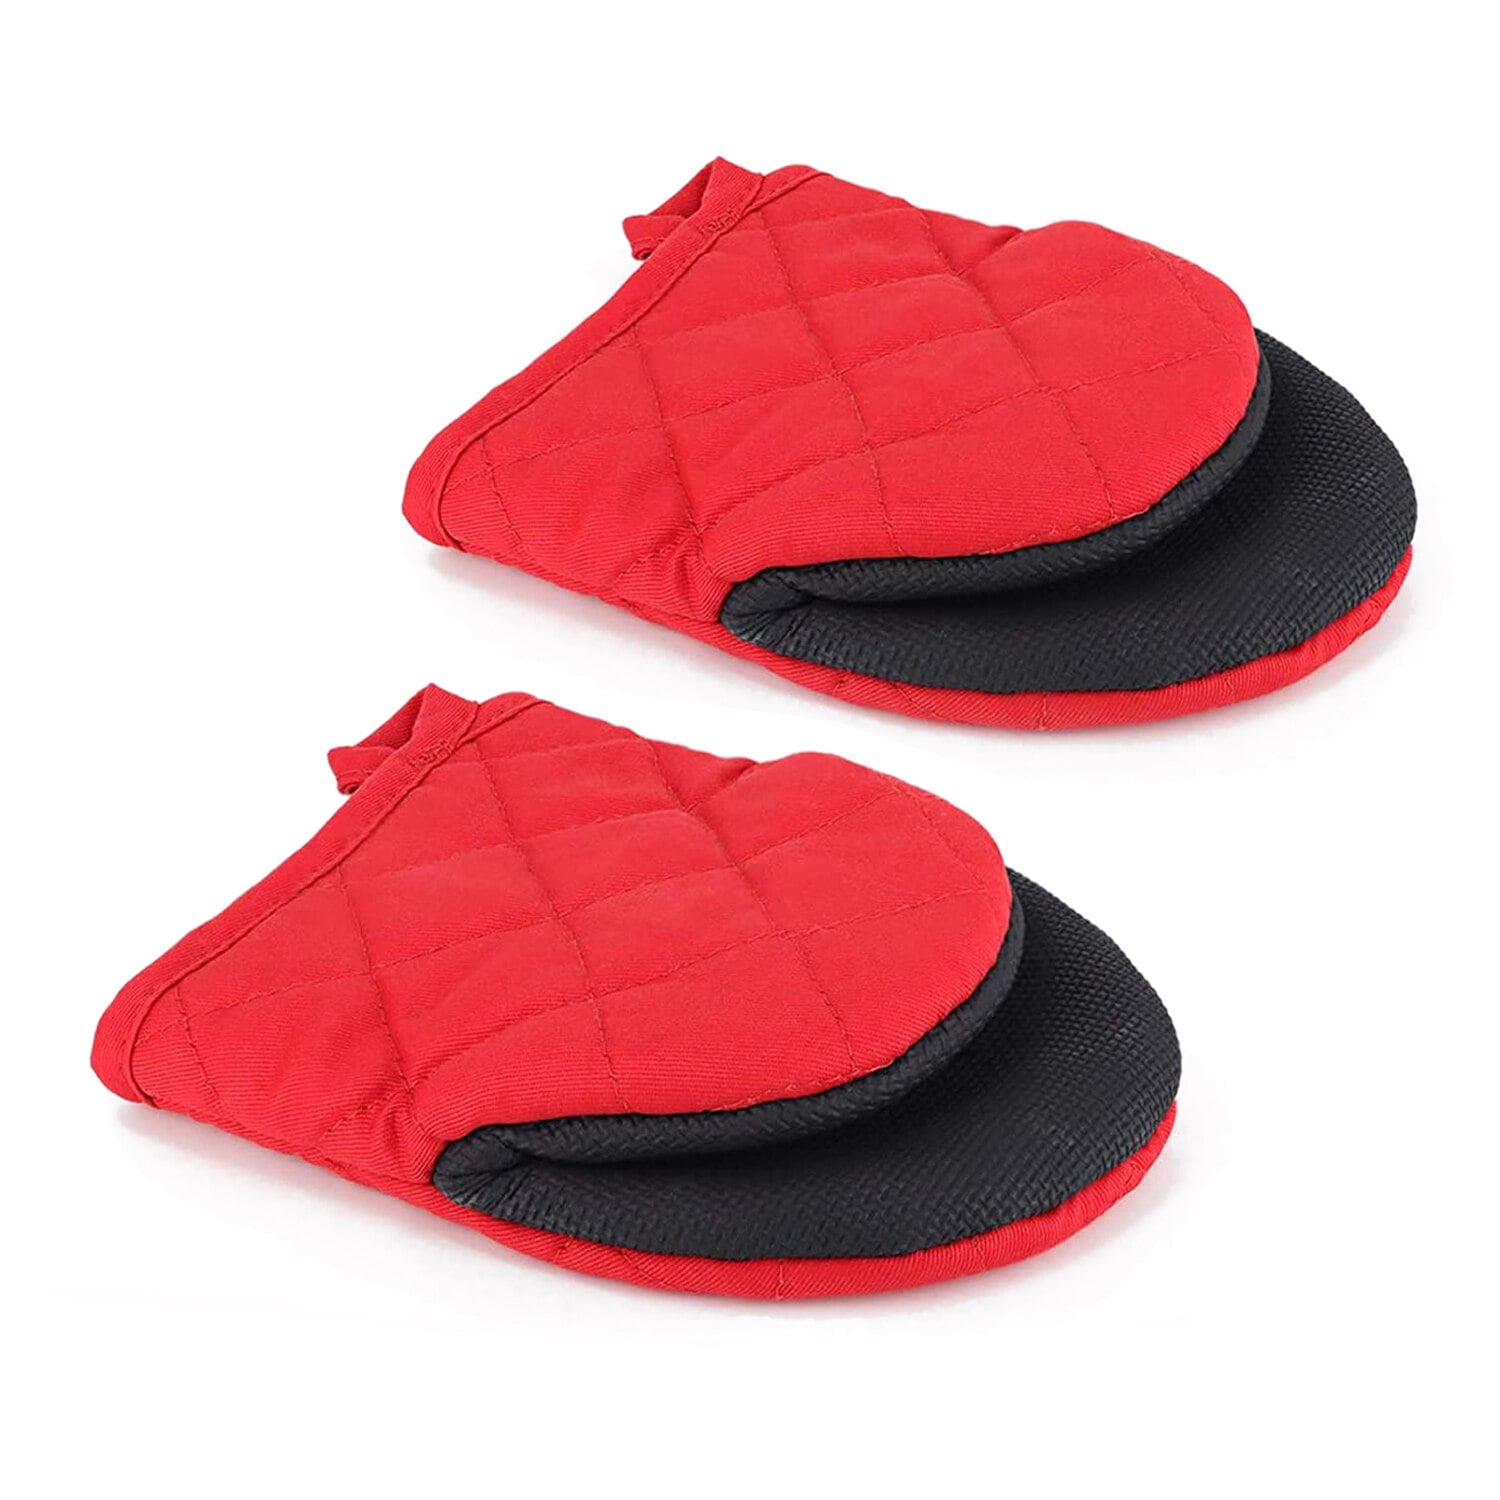 Liveday Cute Oven Mitts and Pot Holder Sets 2pcs Non-Slip